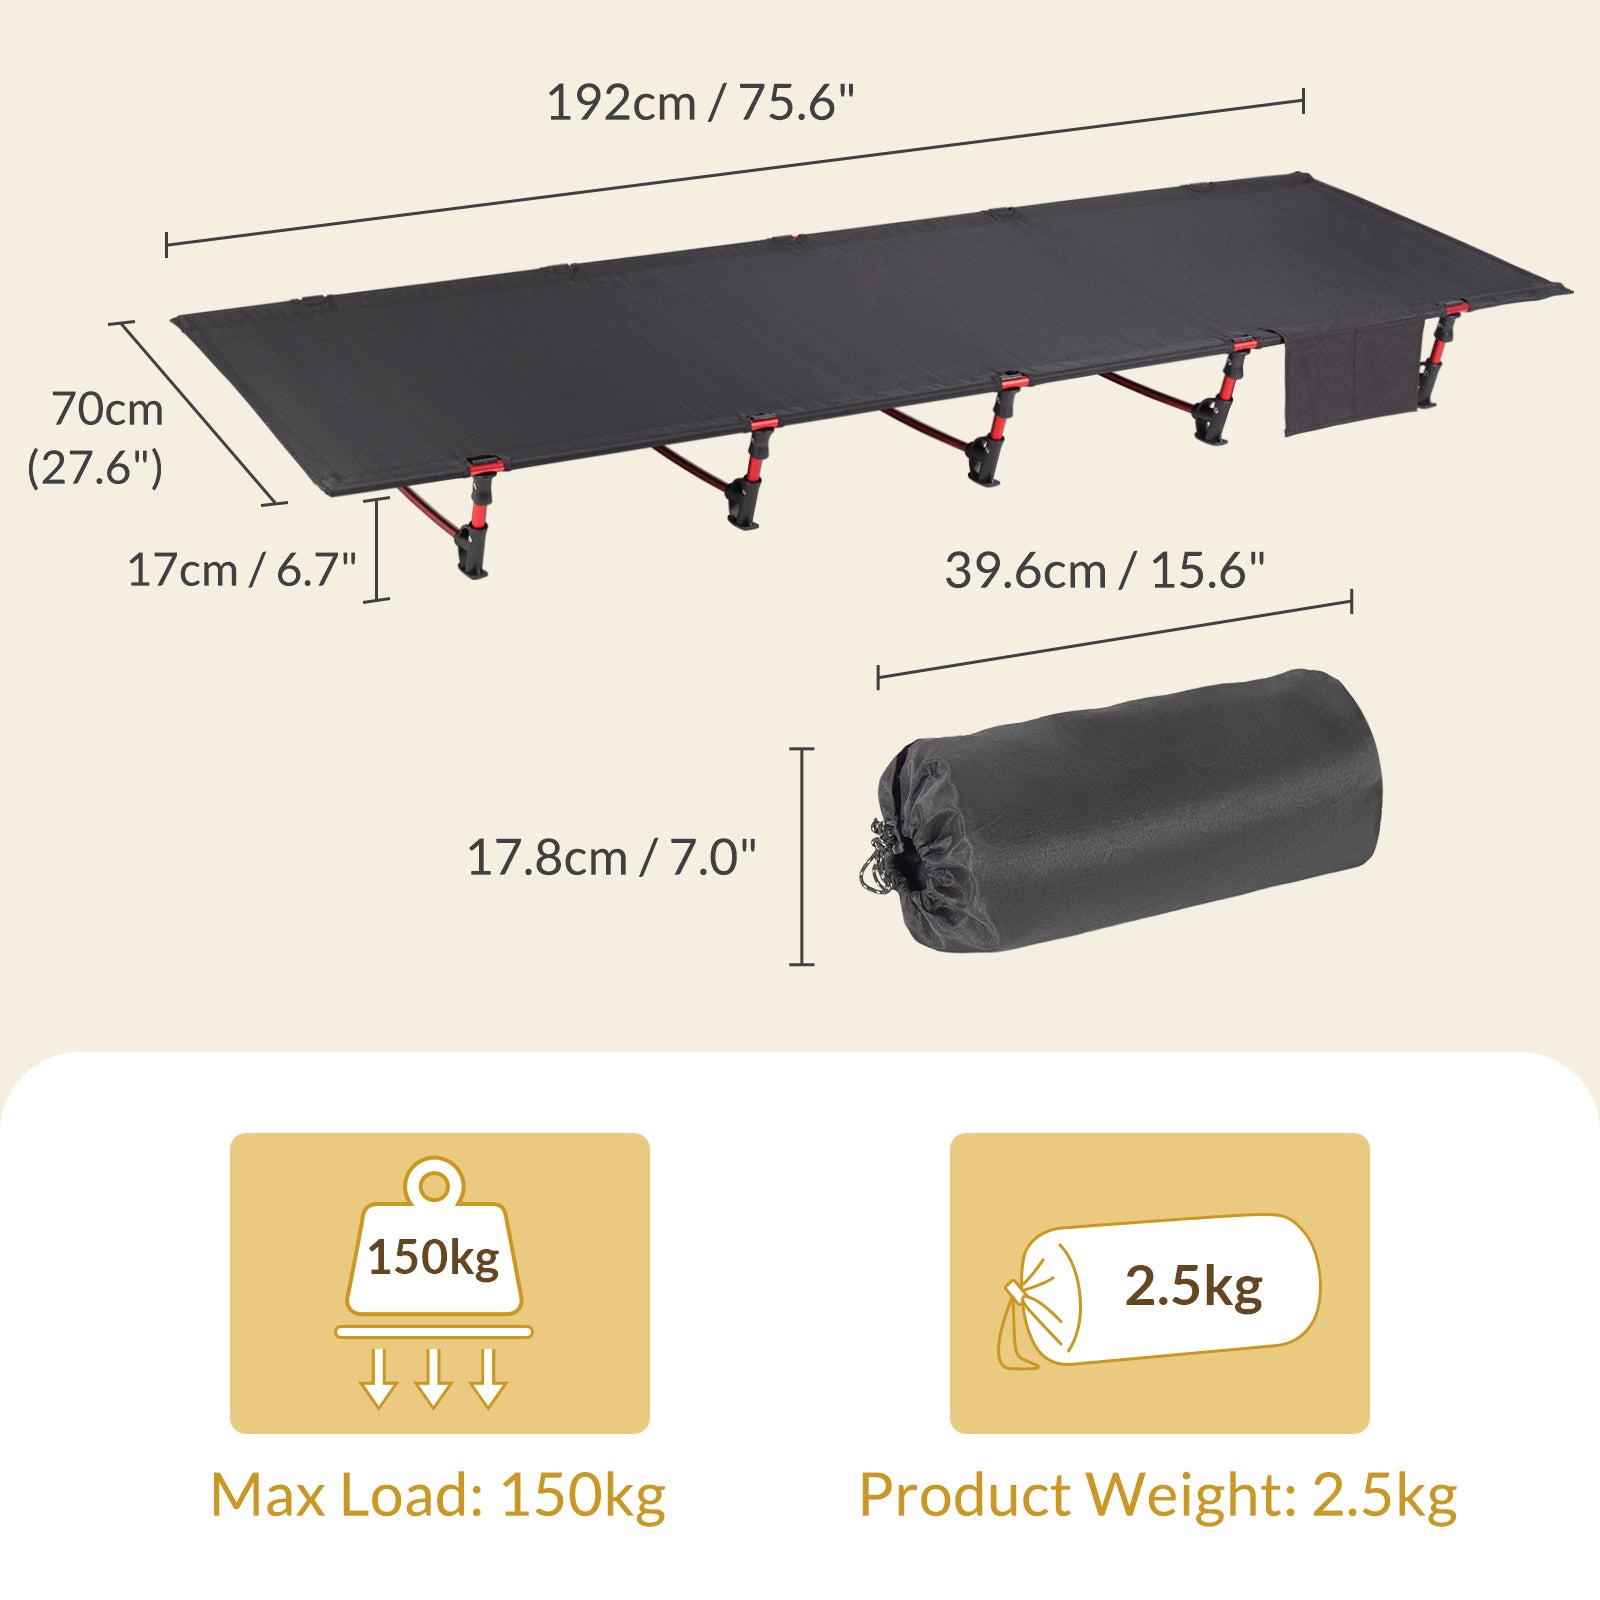 Leogreen-Foldable-Camp-Bed-Ultra-Lightweight-Compact-Strong-and-Durable-192-x-70-x-17cm-for-Tents-Outdoor-Hiking-Traveling-Maximum-Load-150kg-Black